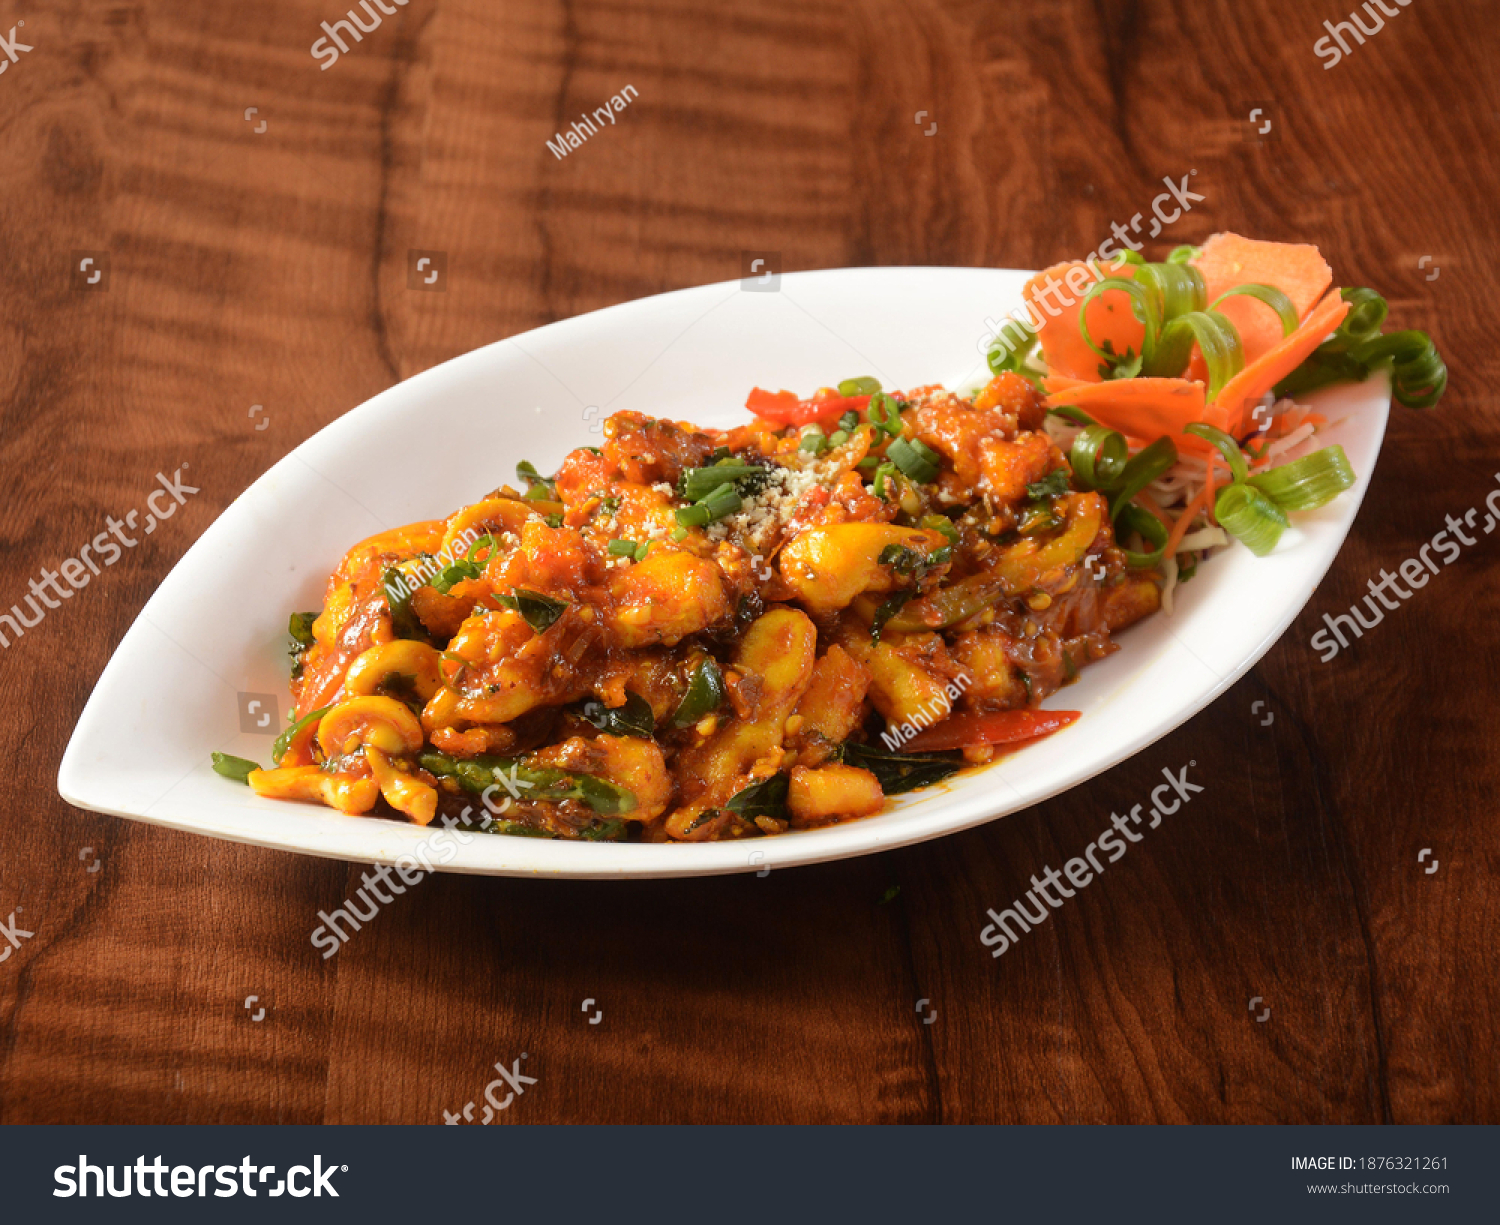 Paneer majestic, is a famous indian dish, served over a rustic wooden background, selective focus #1876321261